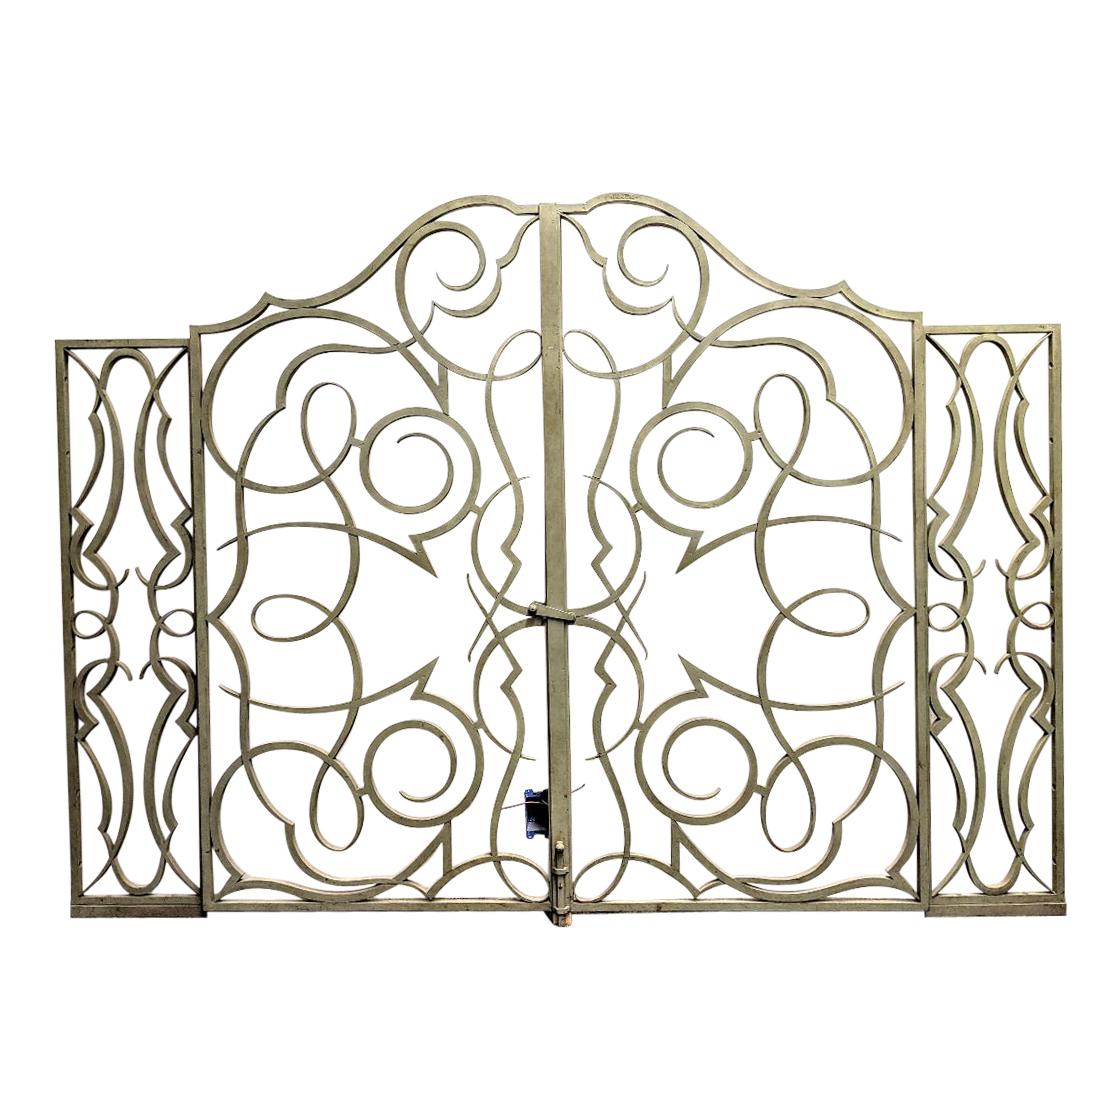 A French Art Deco Wrought Iron Doors, Screens, Gates